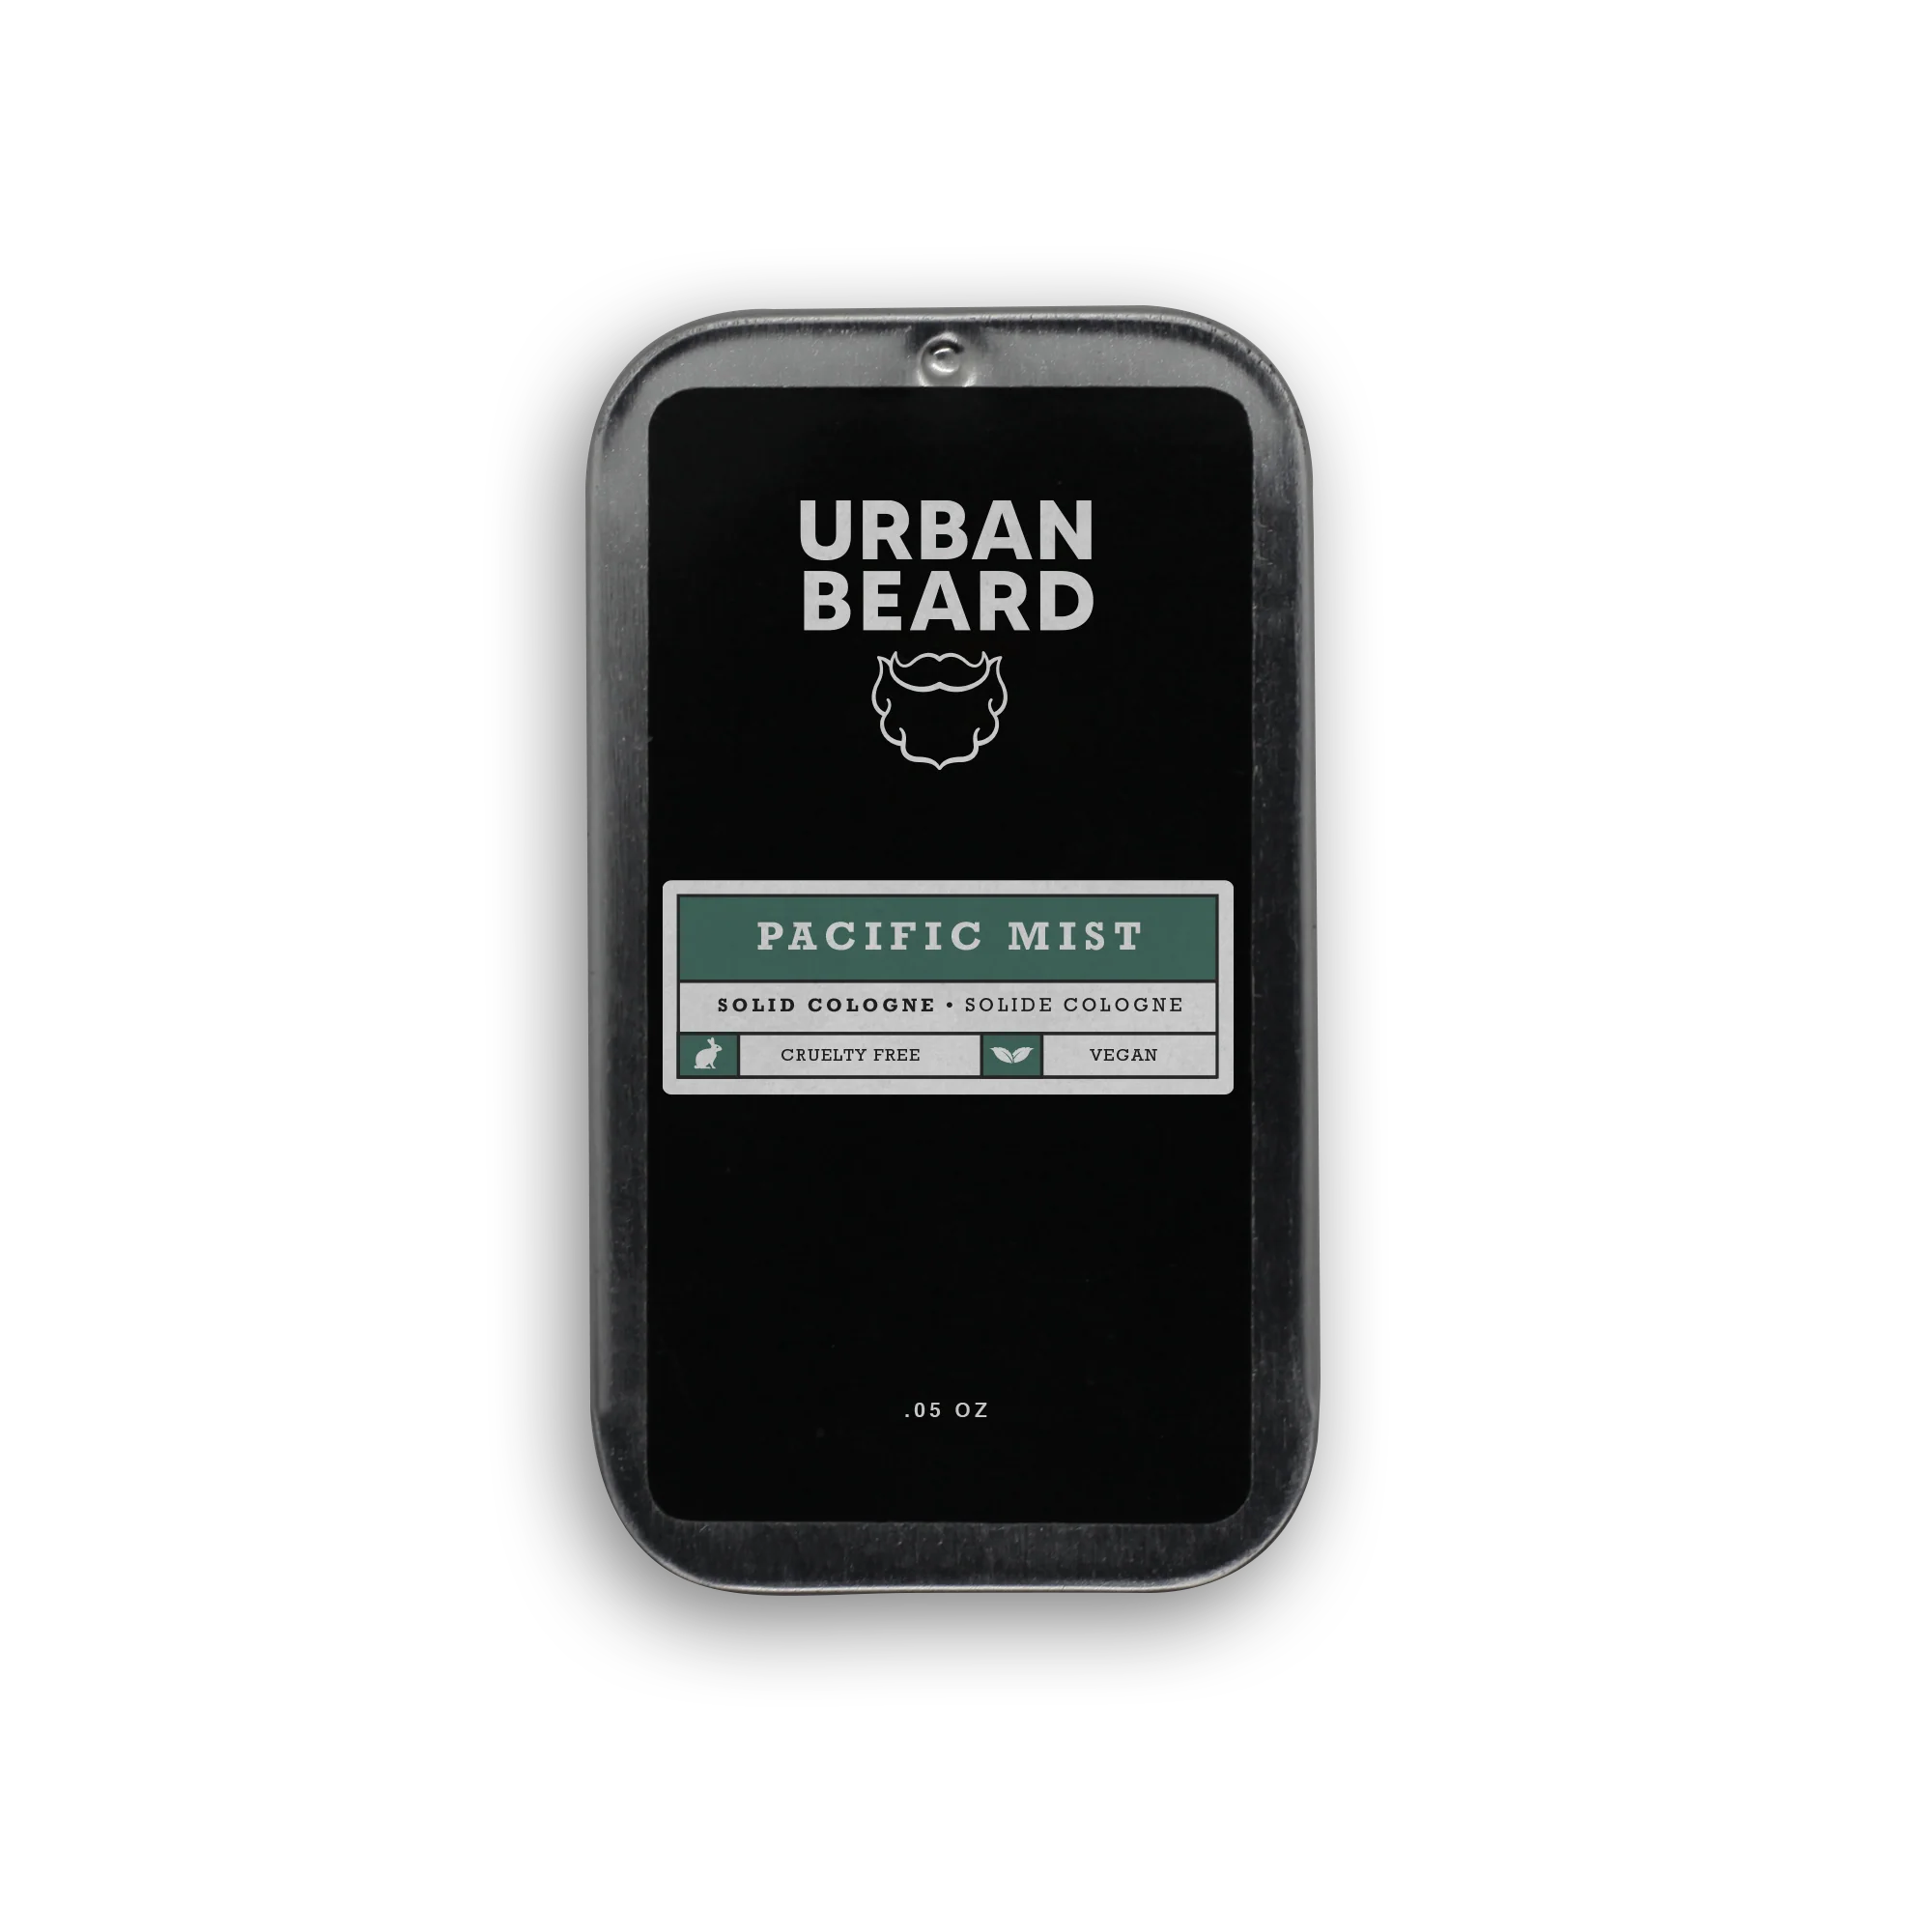 Grooming - Urban Beard - Pacific Mist Solid Cologne